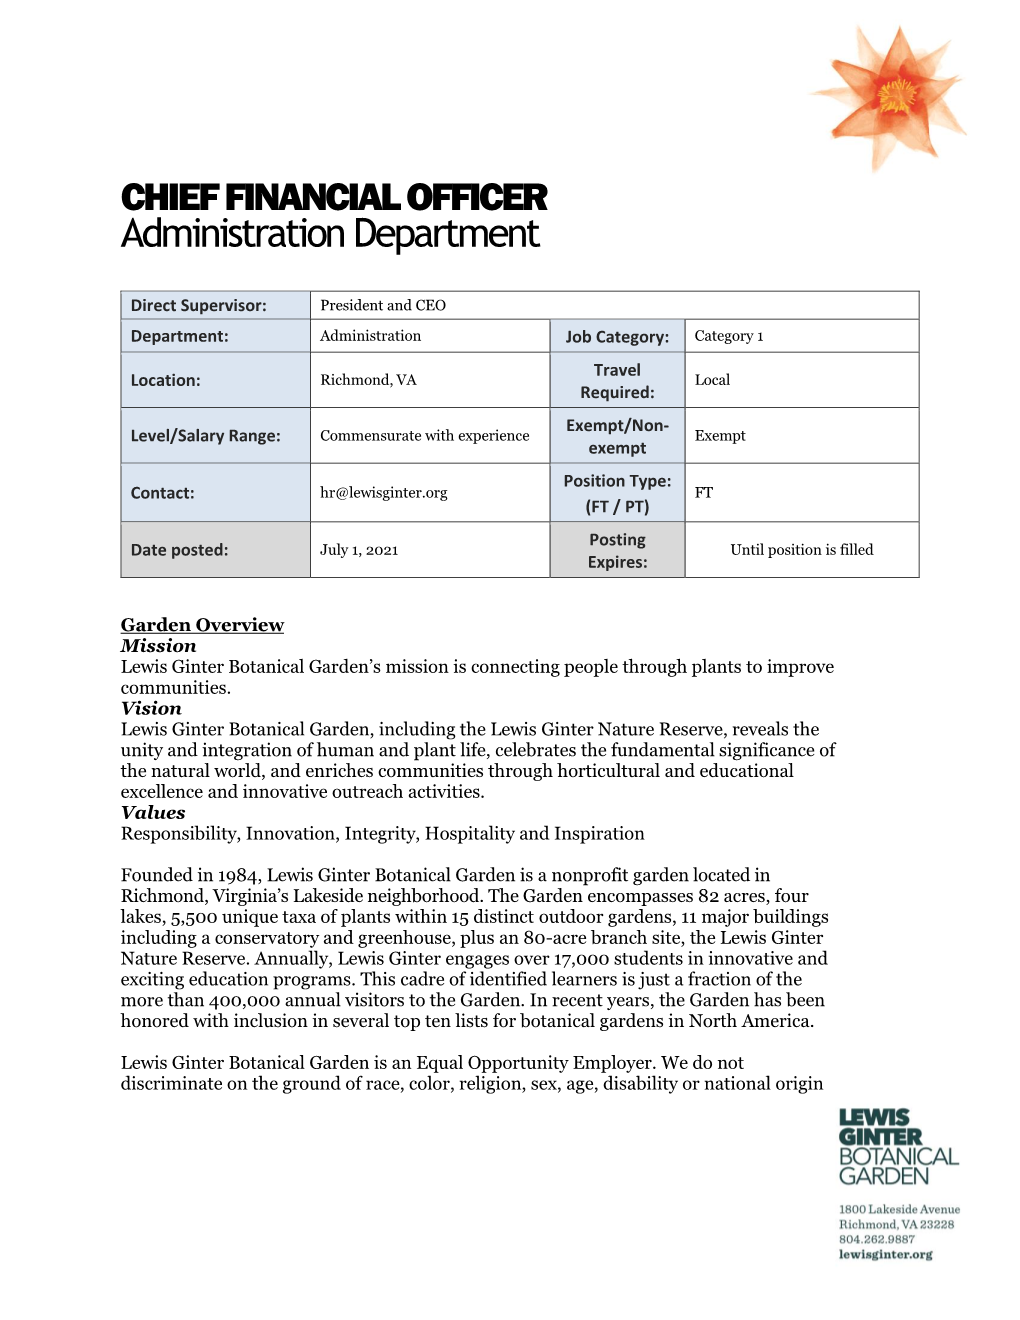 CHIEF FINANCIAL OFFICER Administration Department